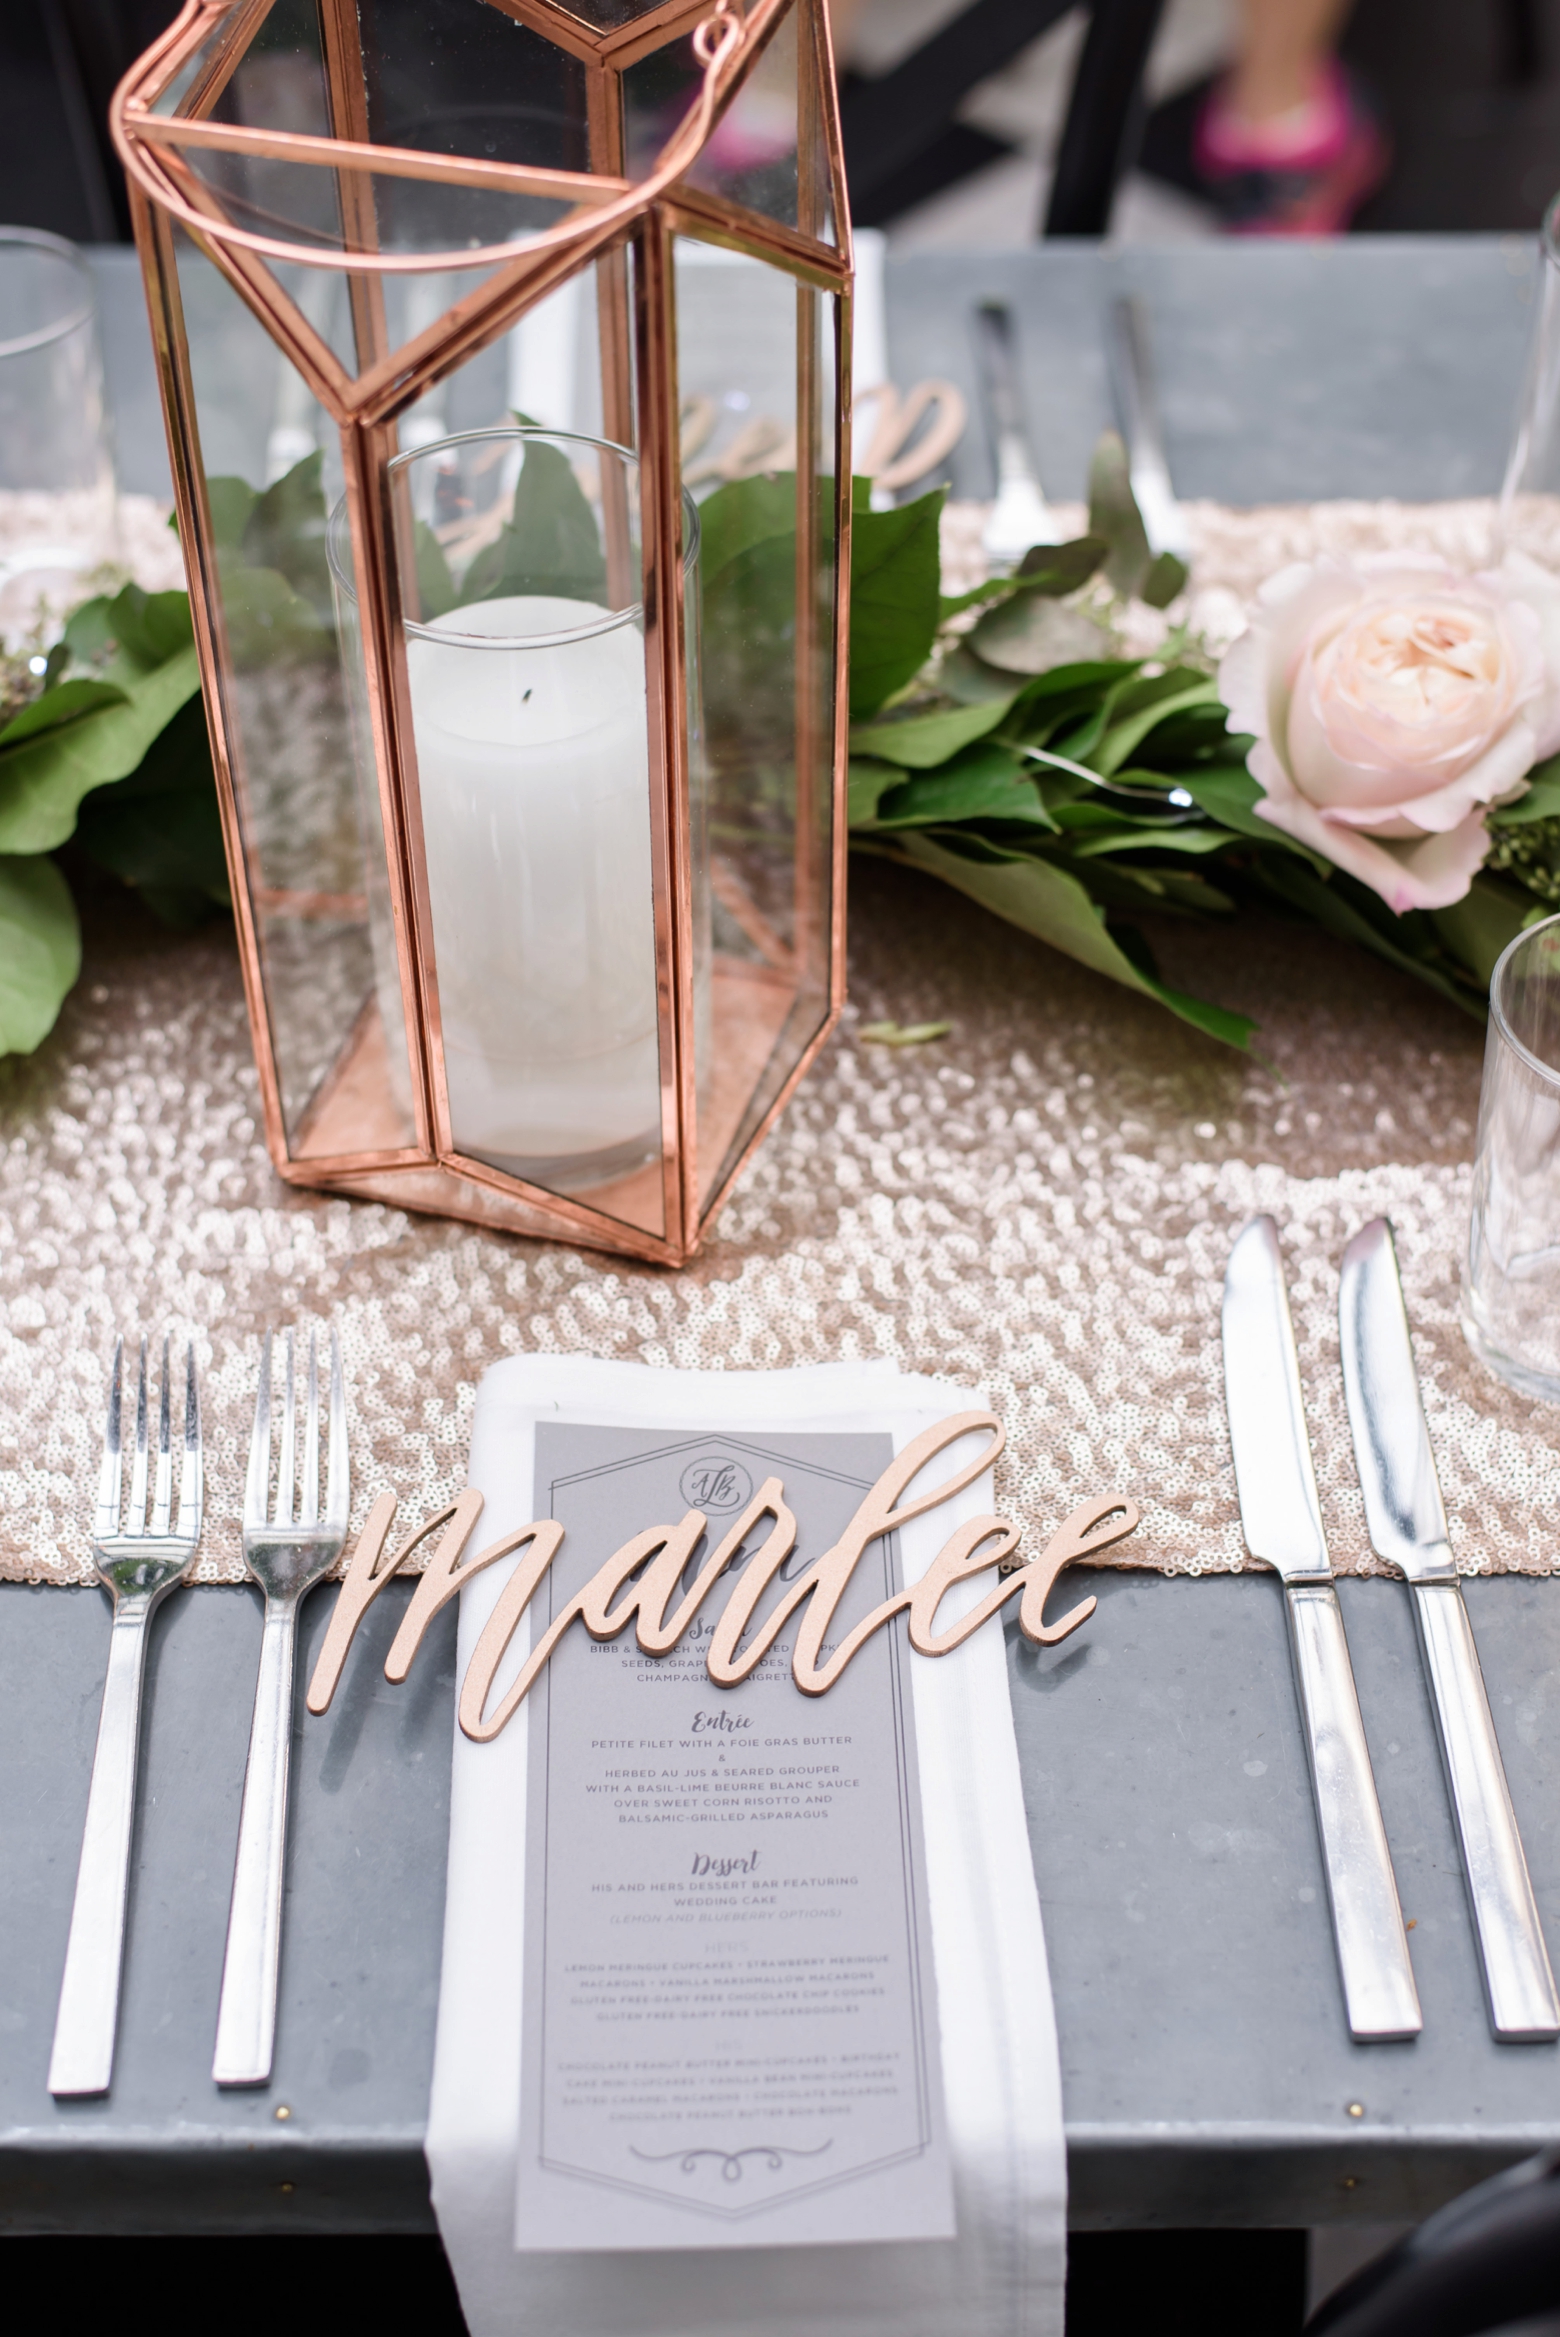 Custom name place holders and rose gold candle holders fill the table during reception